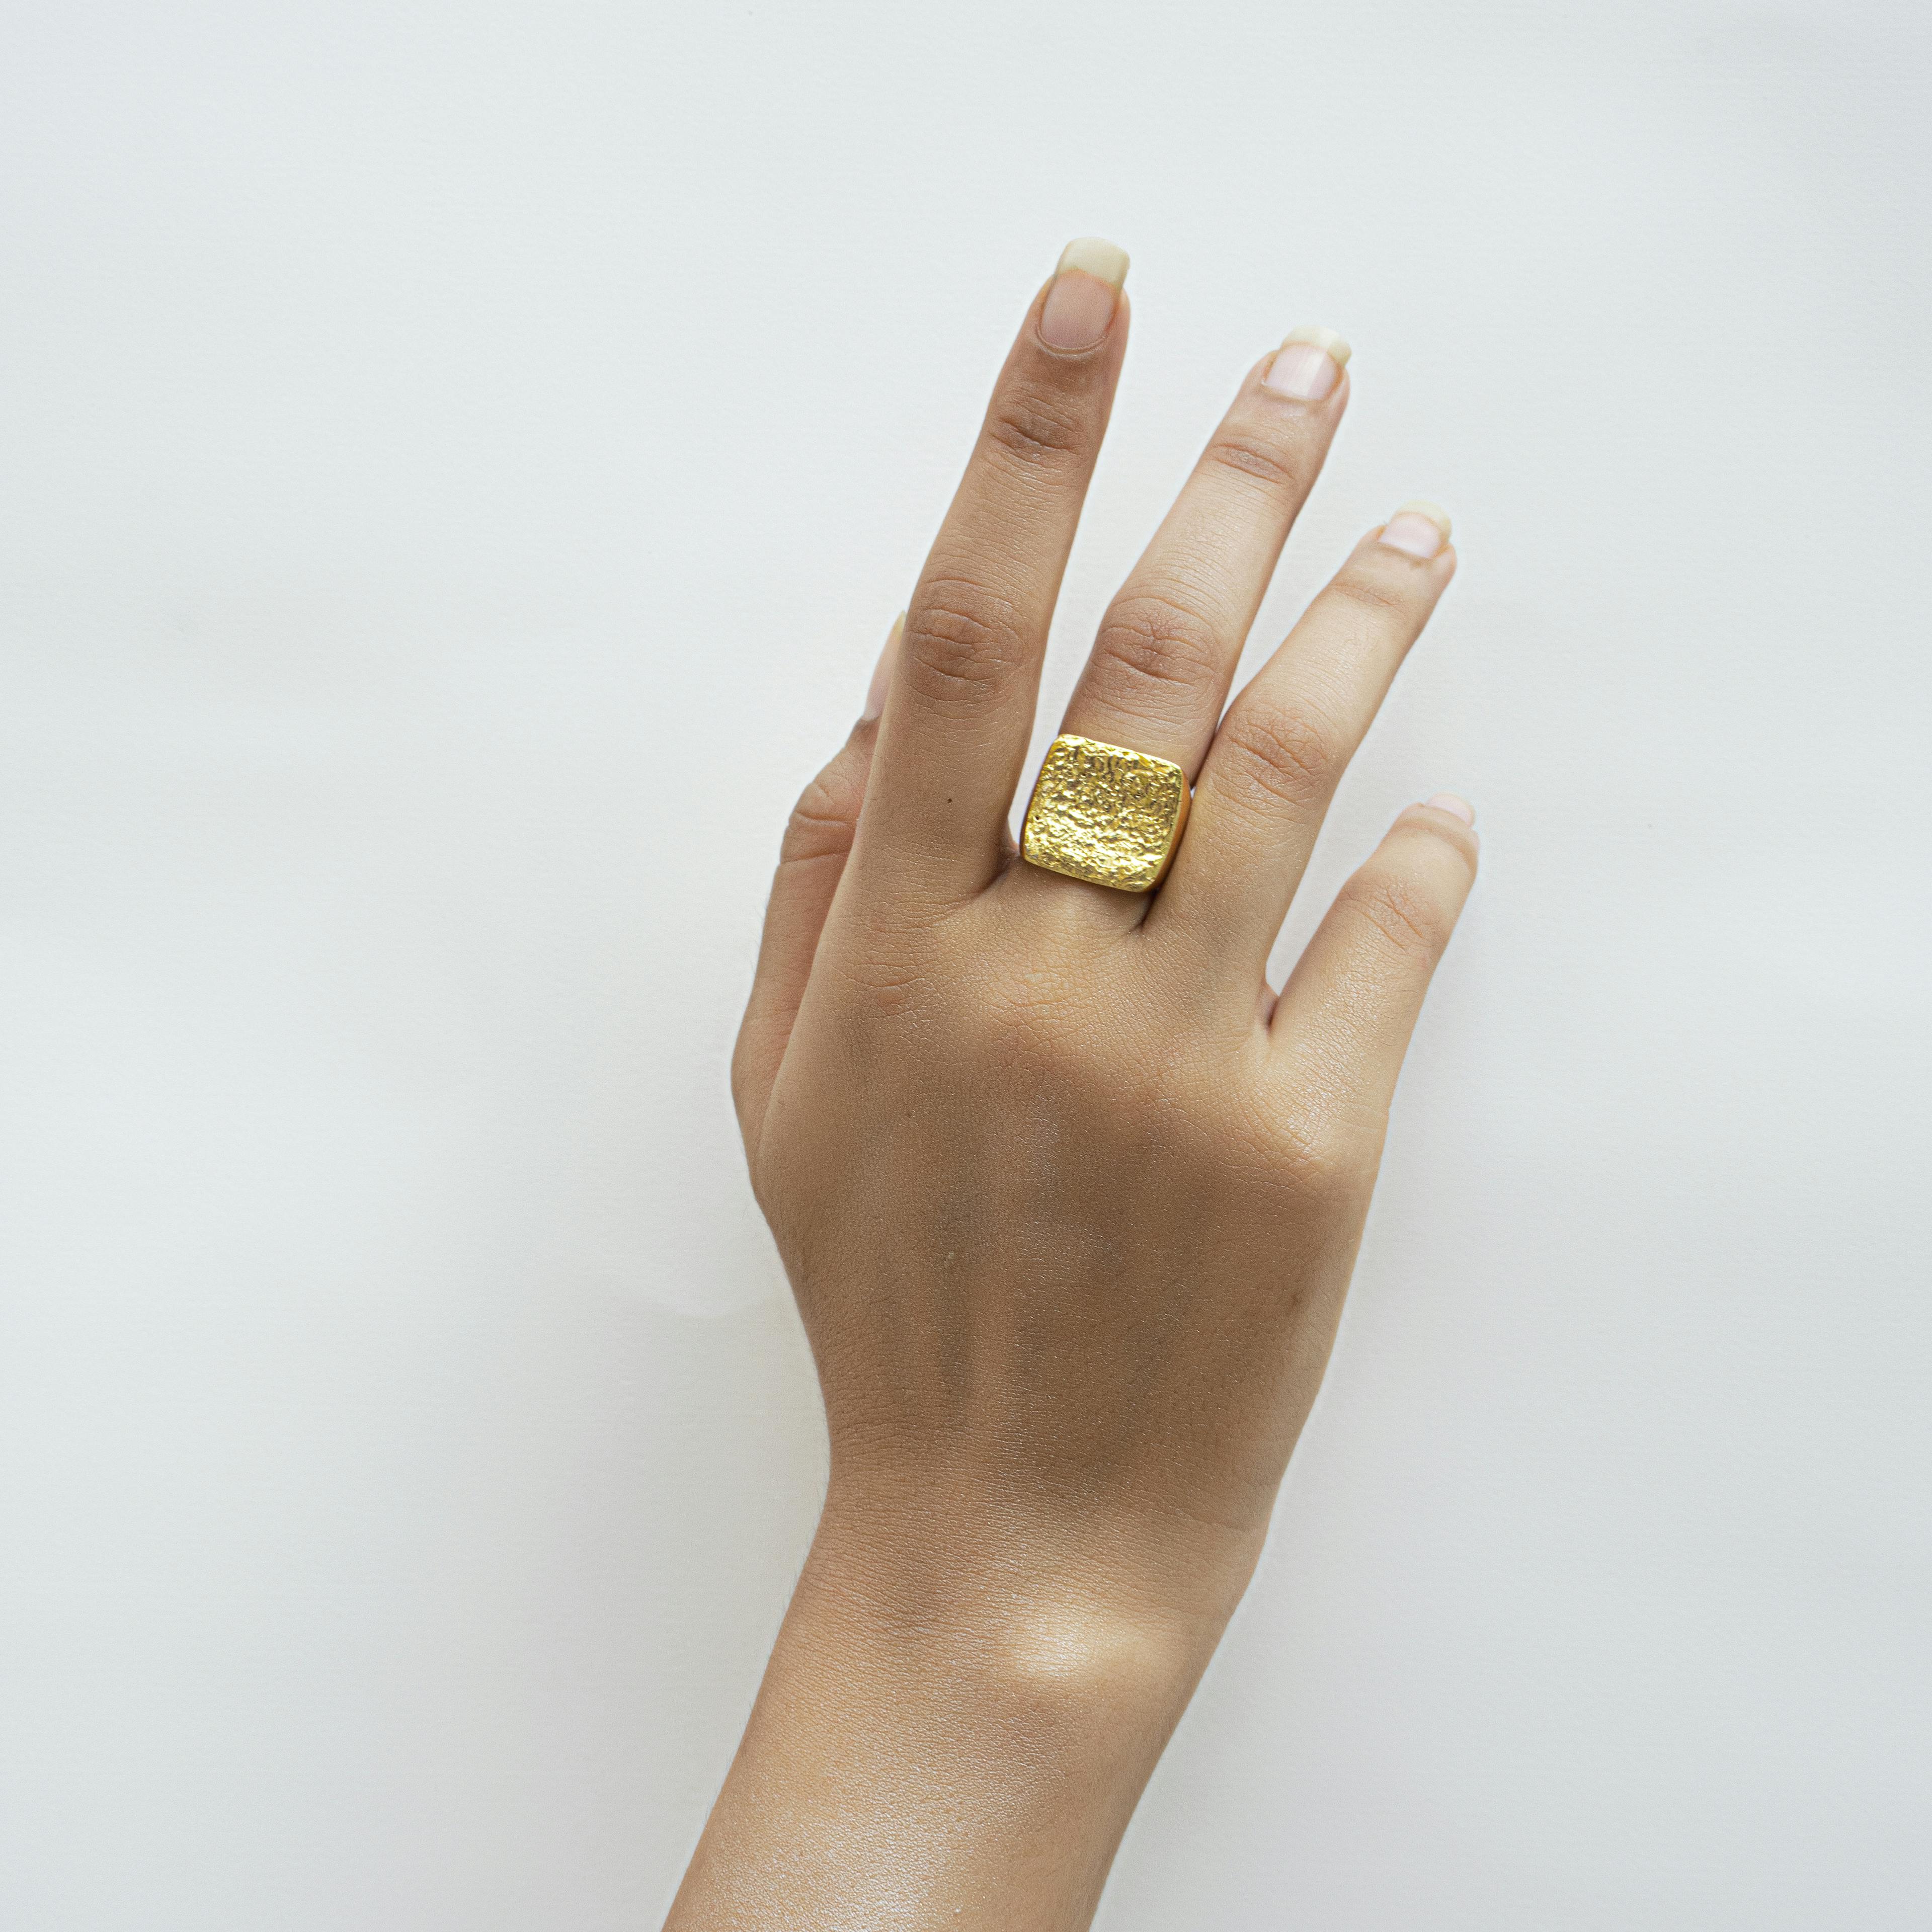 BOXY BOSS RING GOLD , a product by Equiivalence